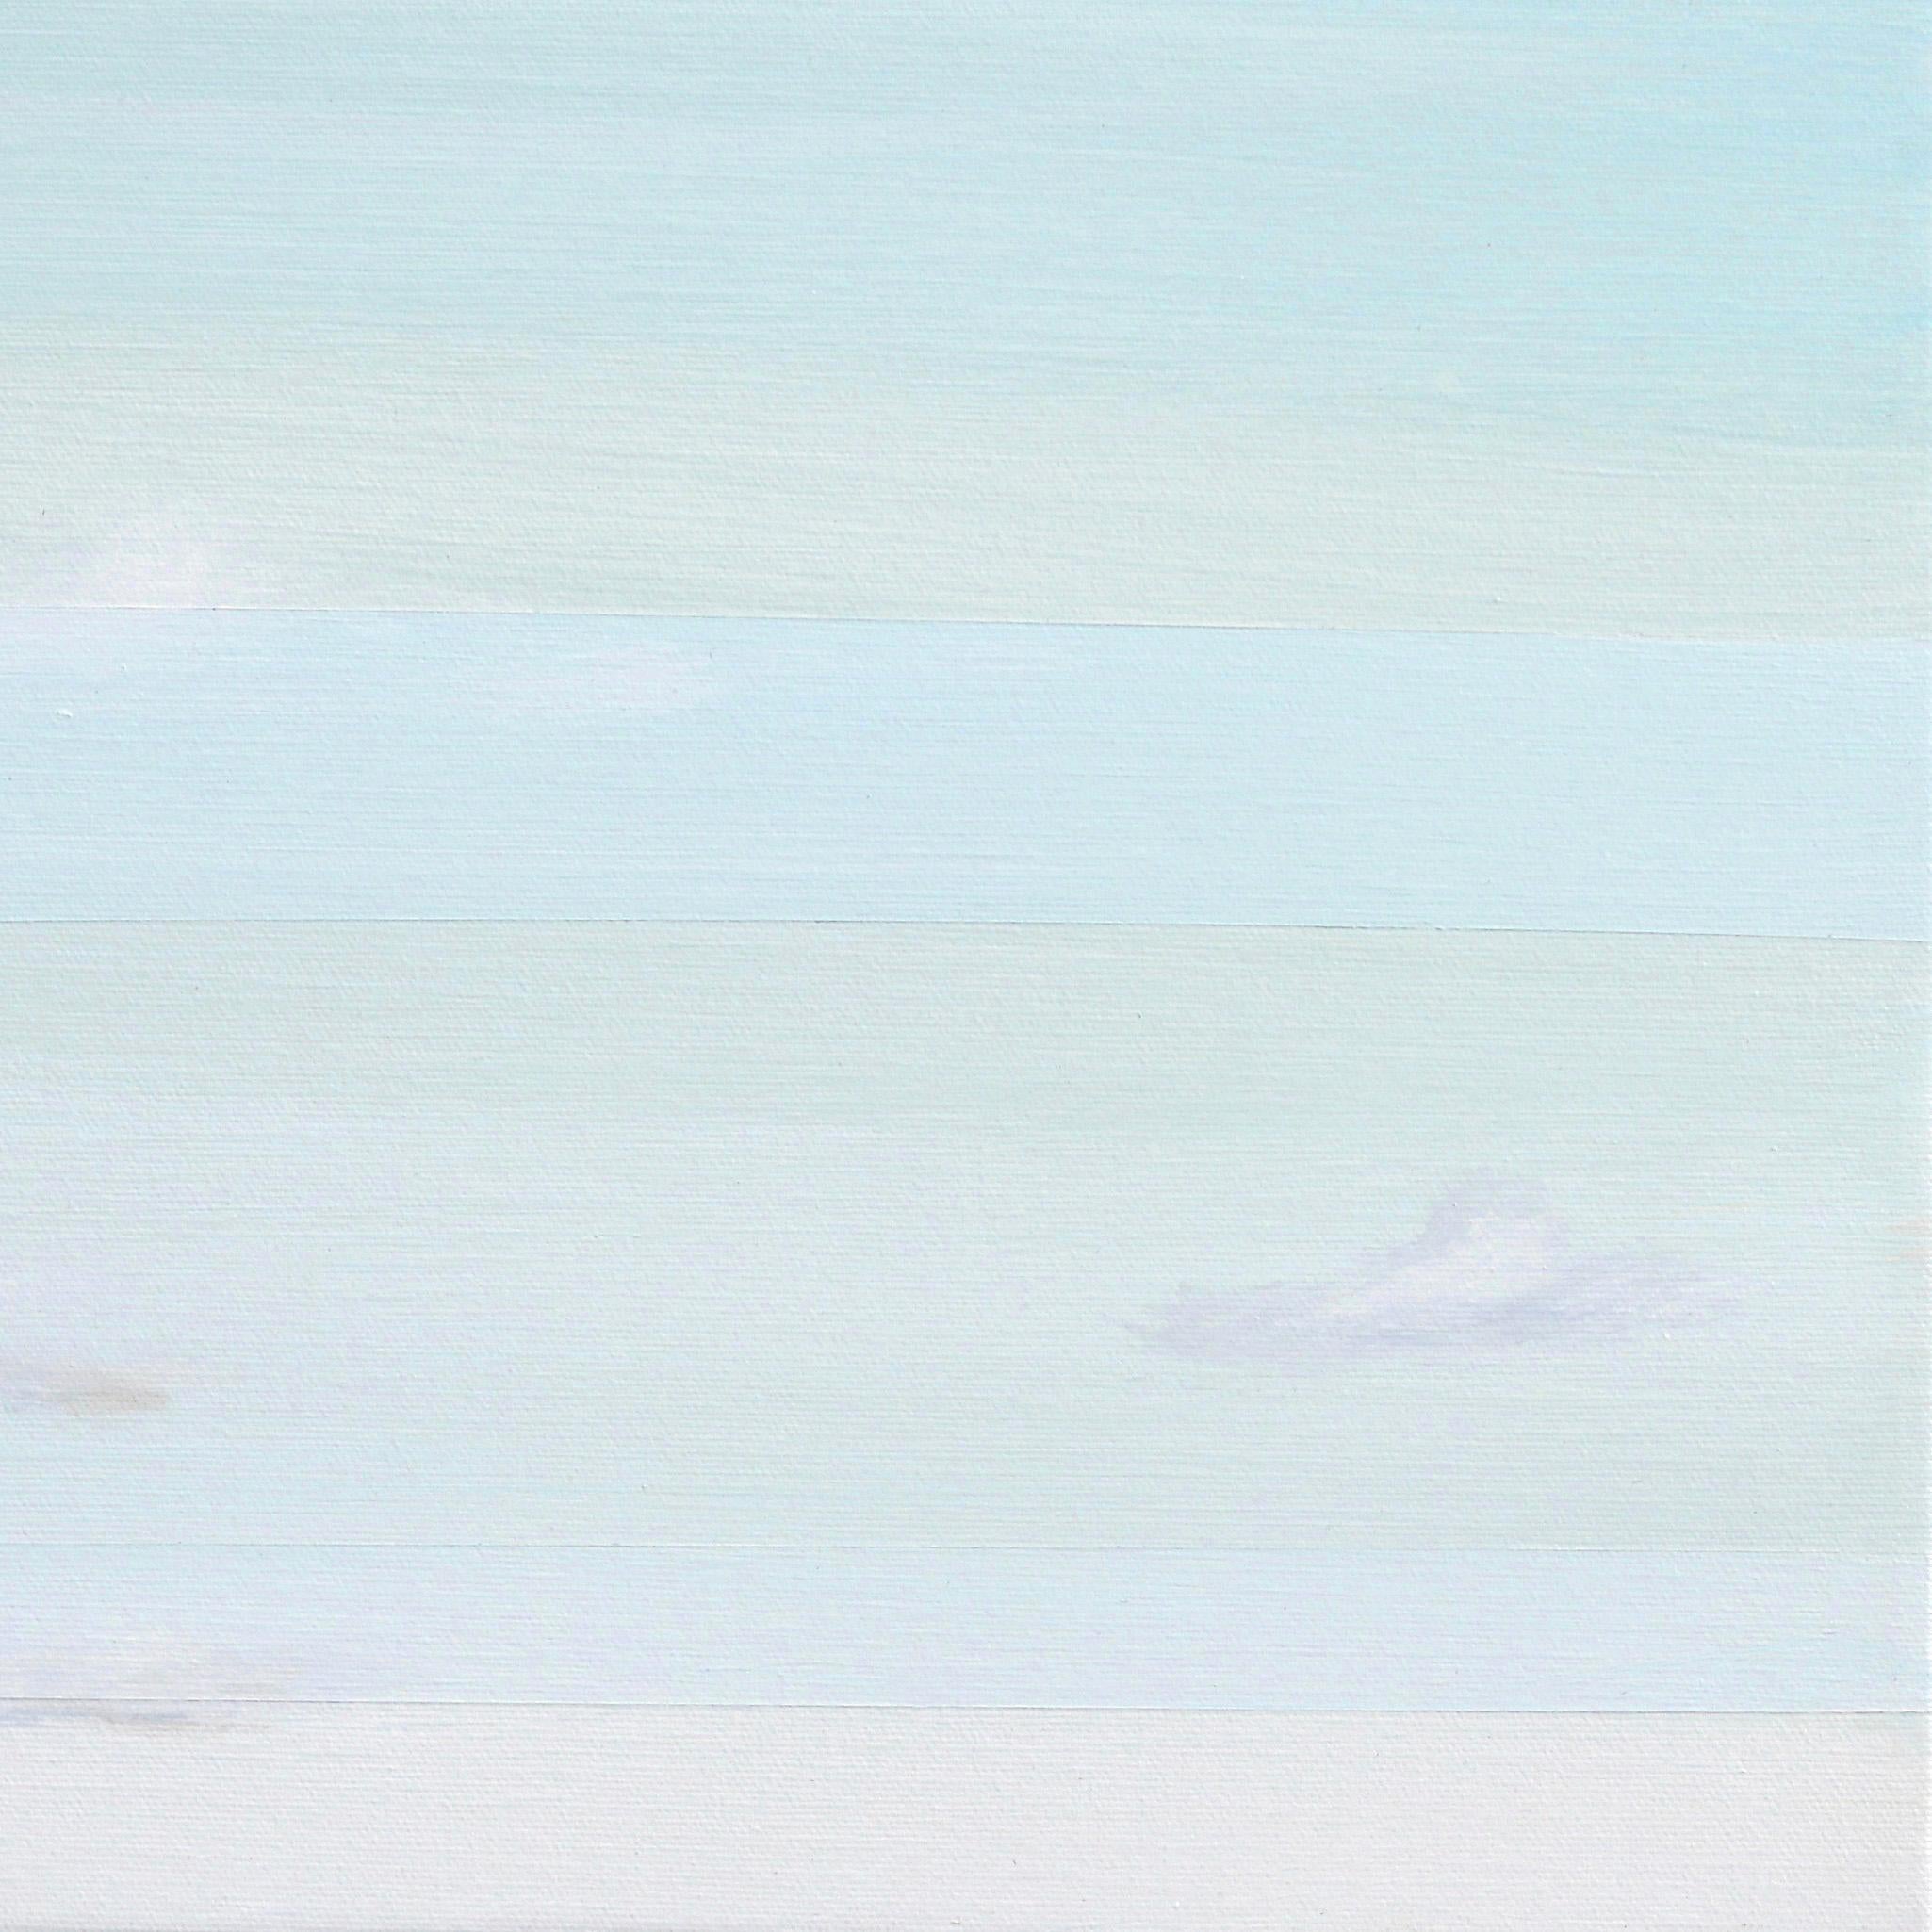 Morning Breeze 2 - Original Soft Sky Painting with Geometric Accents For Sale 4